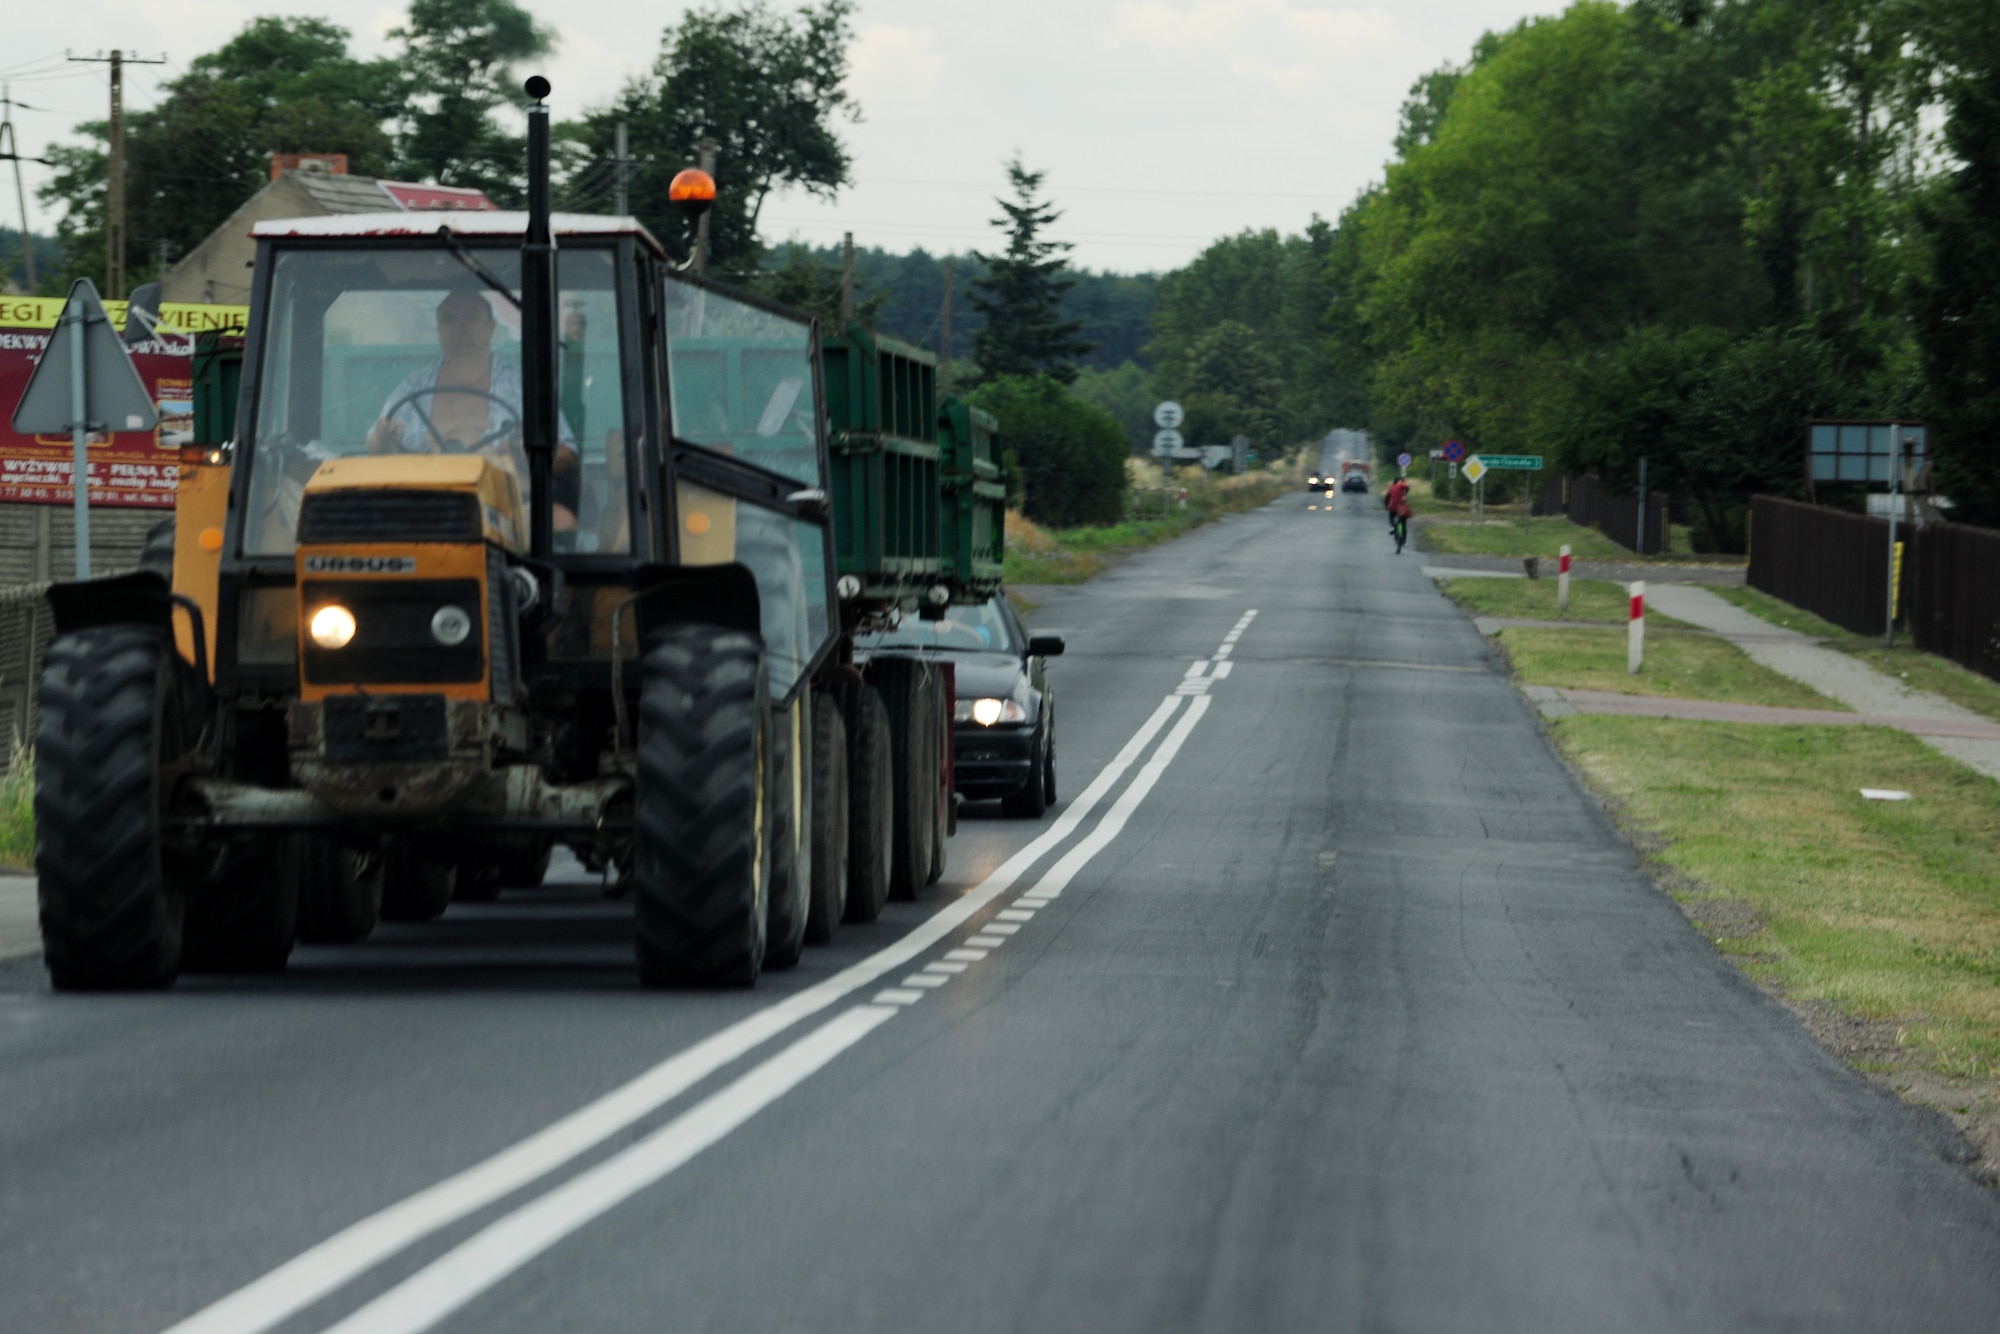 A tractor hauls local farming goods and supplies along the road to Powidz Air Base, Poland, Aug. 1, 2014. Nearly 75 years ago, these roads were packed with troops from Nazi Germany, as they invaded the country. (U.S. Air Force photo by Staff Sgt. Jarad A. Denton/Released)